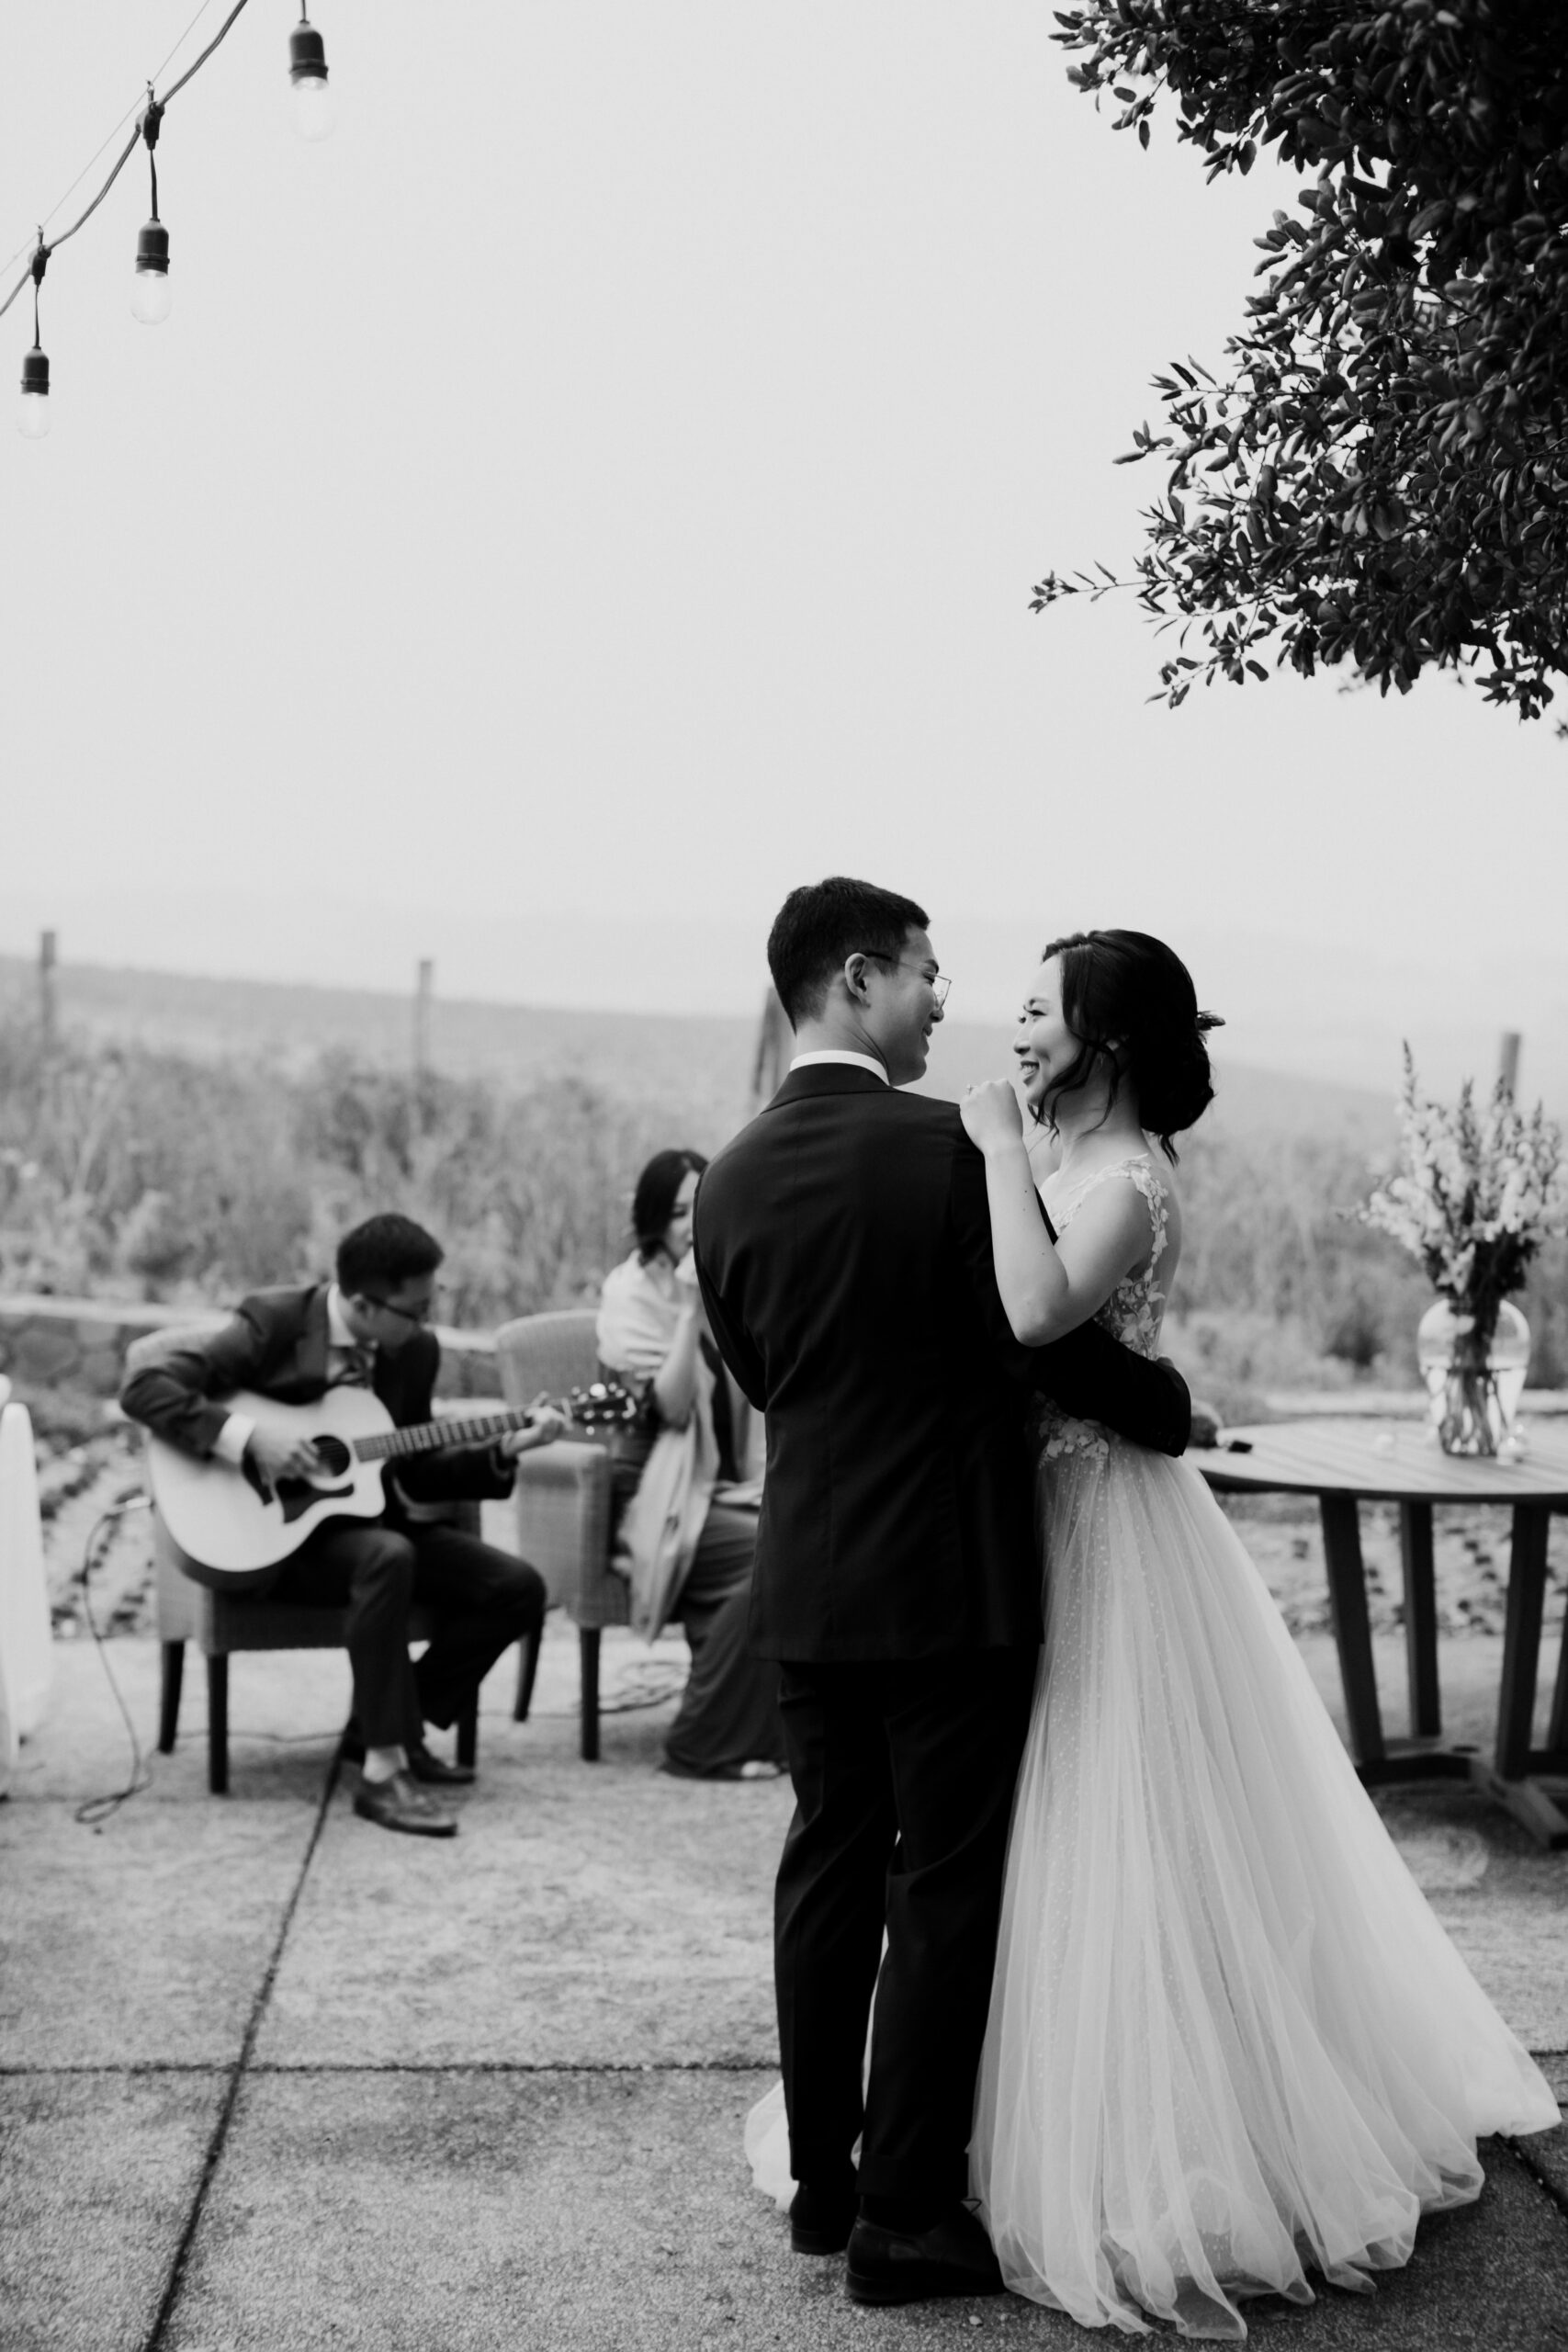 Stunning black and white photo of a bride and groom during their Napa valley vineyard wedding